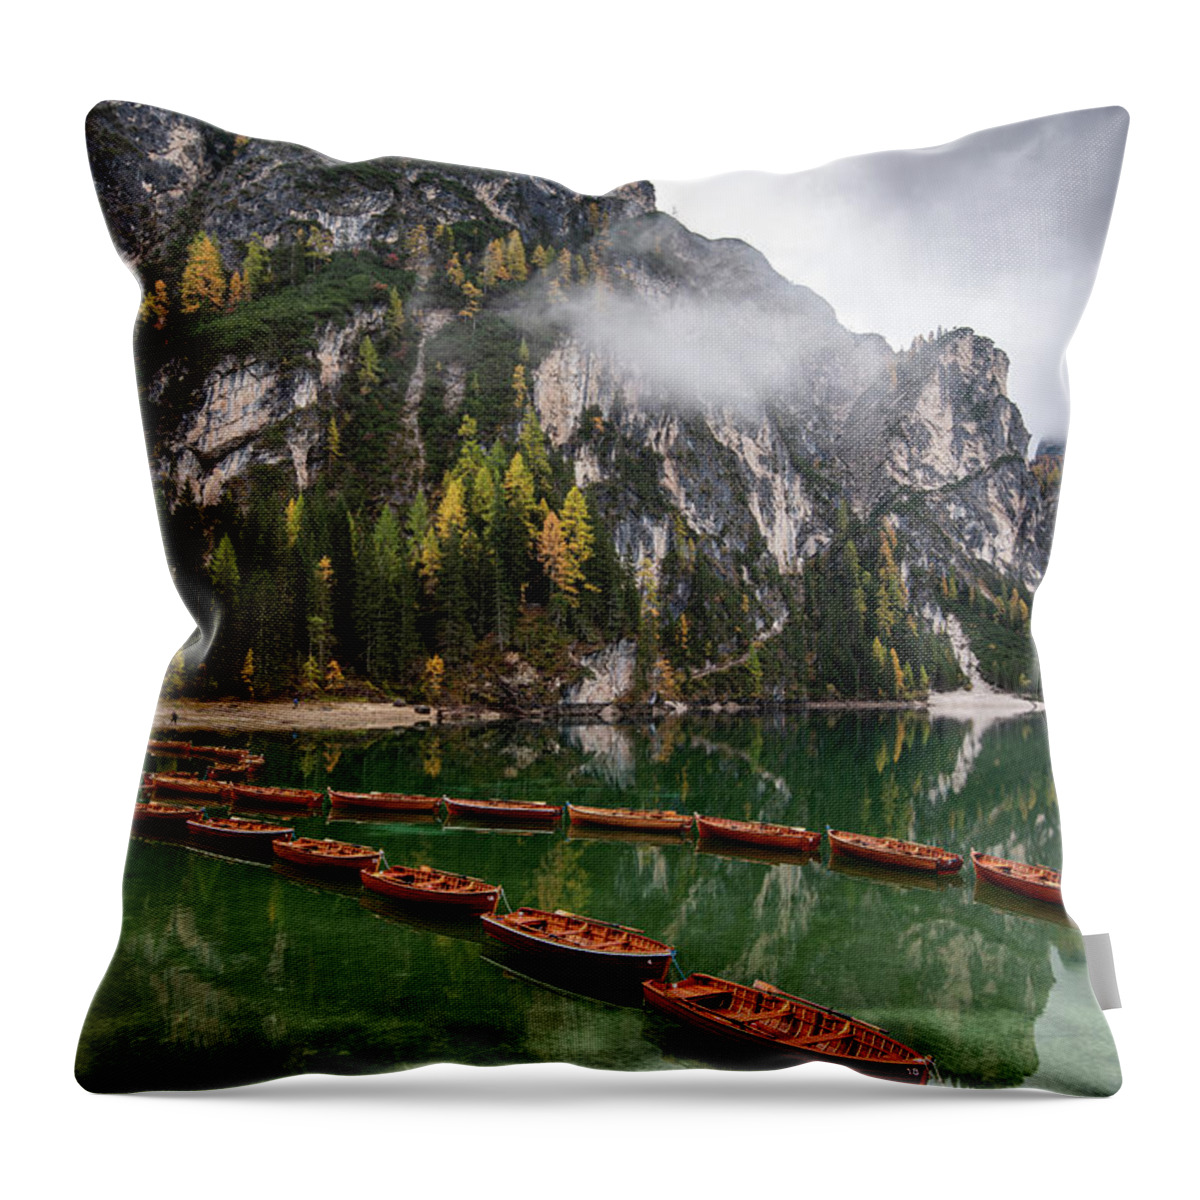 Lago Di Braies Throw Pillow featuring the photograph Wooden boats on the peaceful lake. Lago di braies, Italy by Michalakis Ppalis